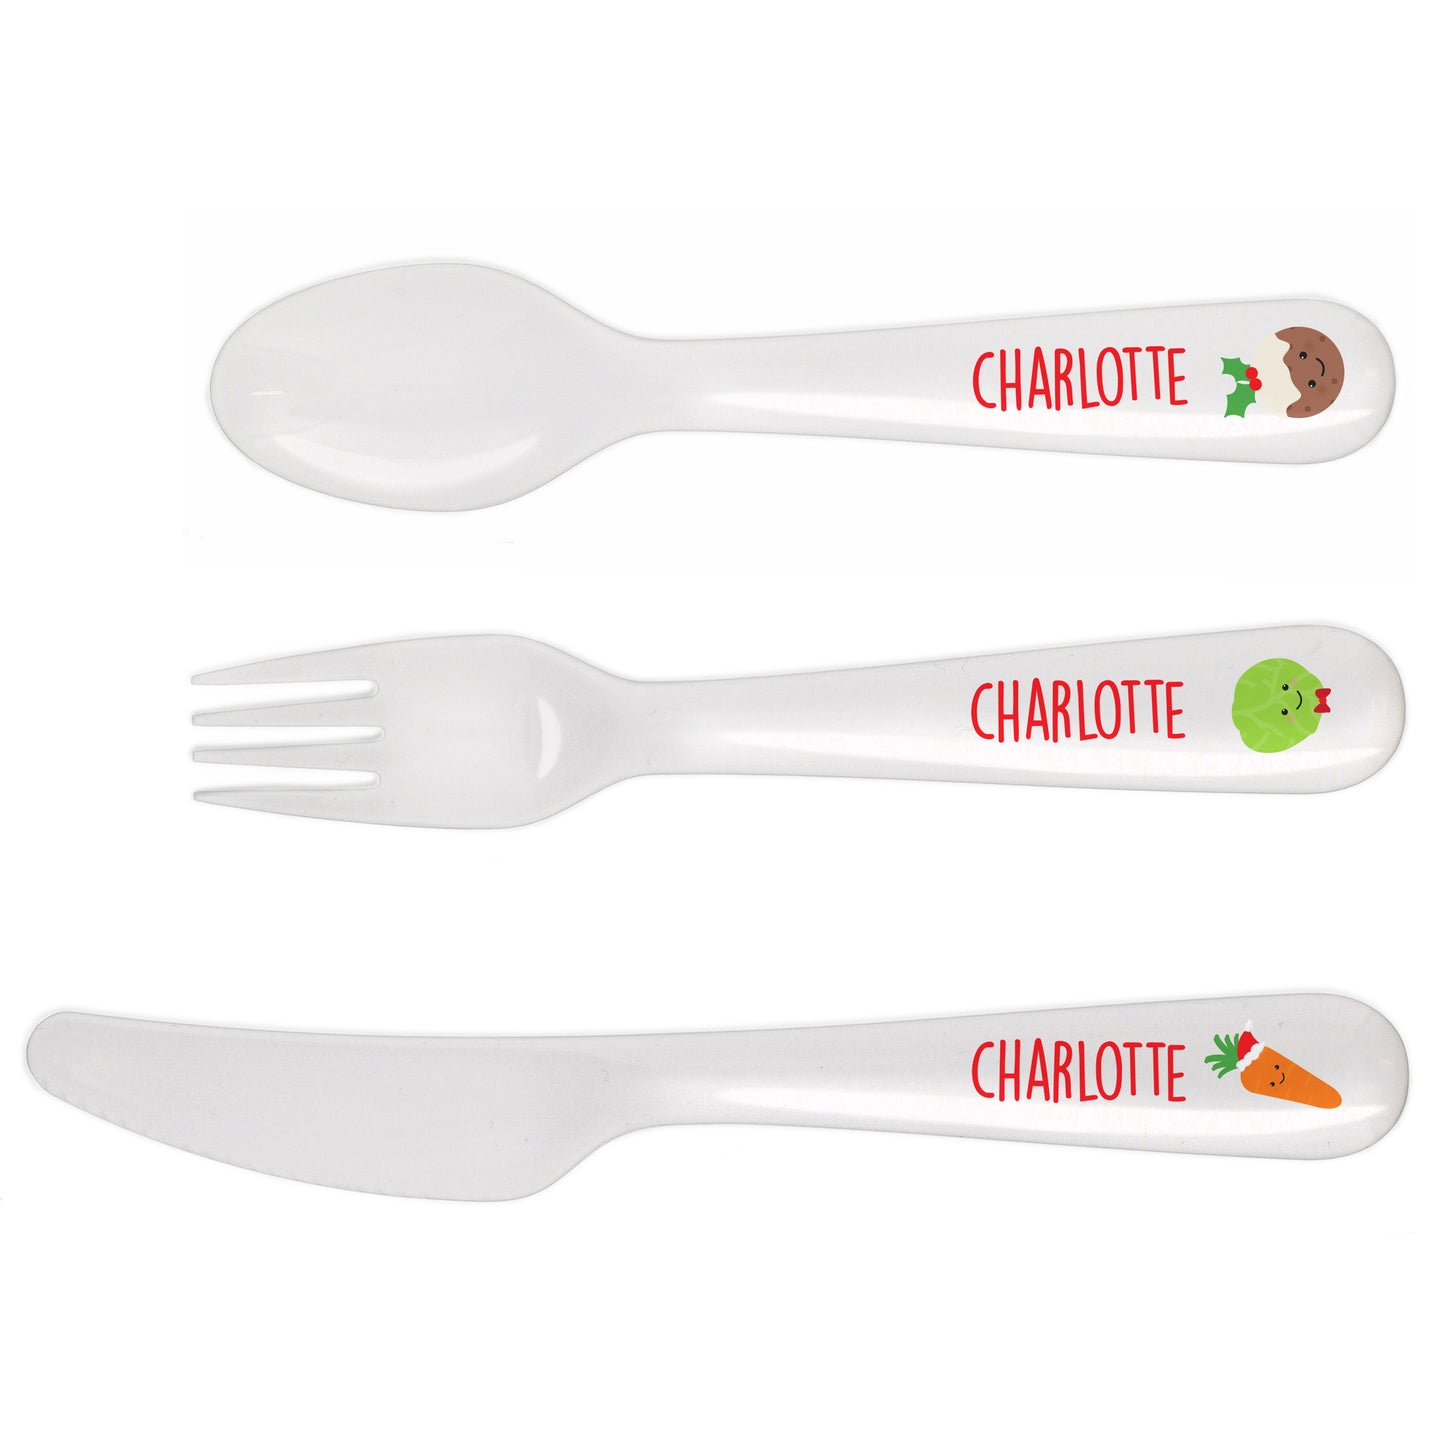 Personalised 'First Christmas Dinner' 3 Piece Plastic Cutlery Set - Personalise It!